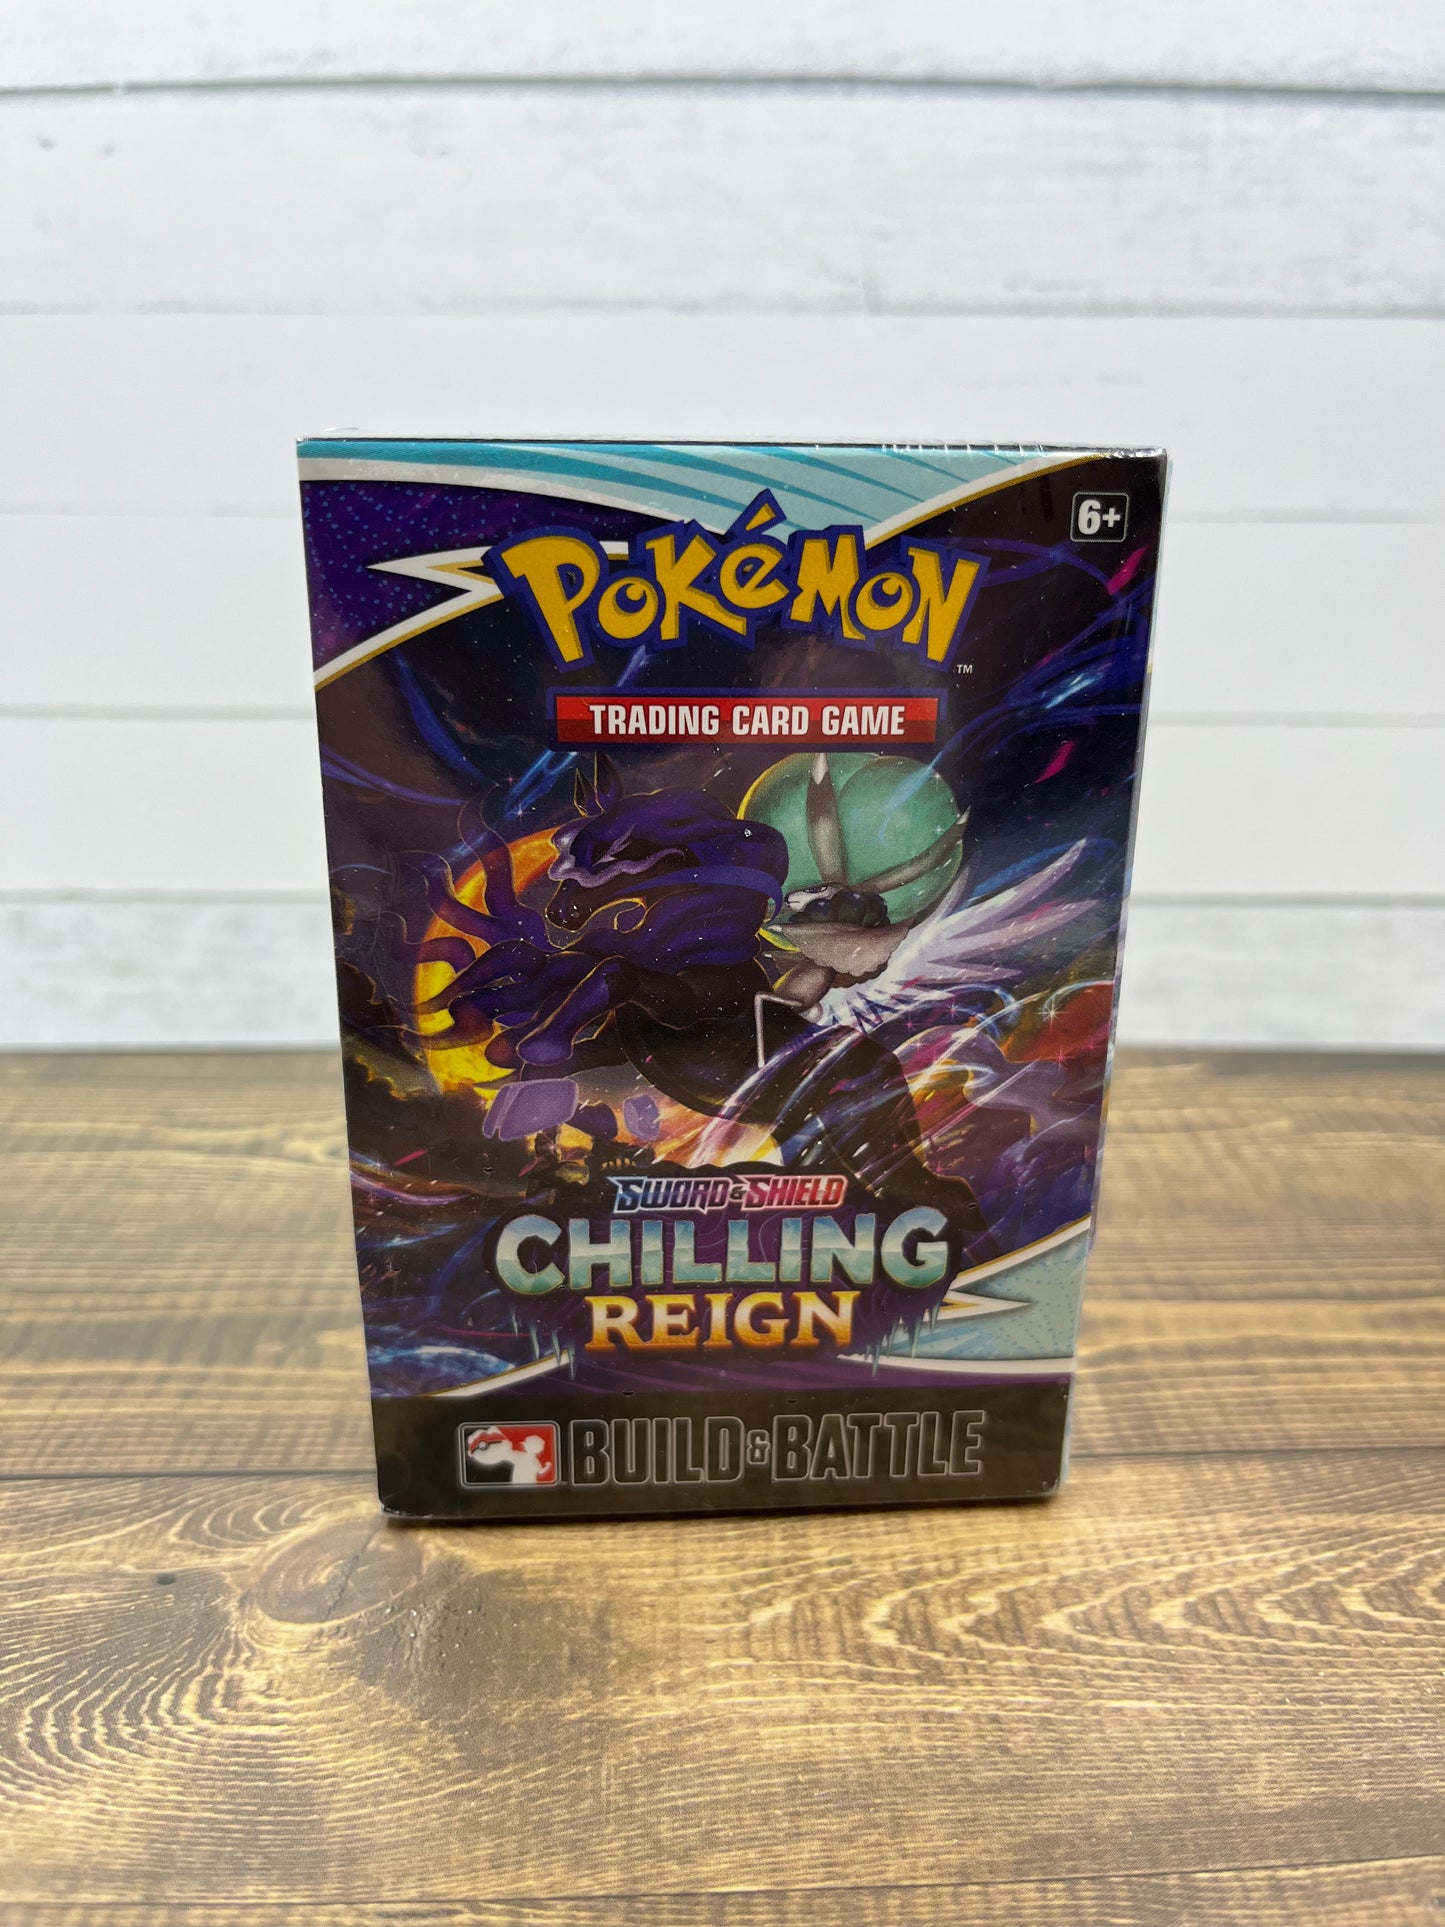 Chilling Reign - Build and Battle Box